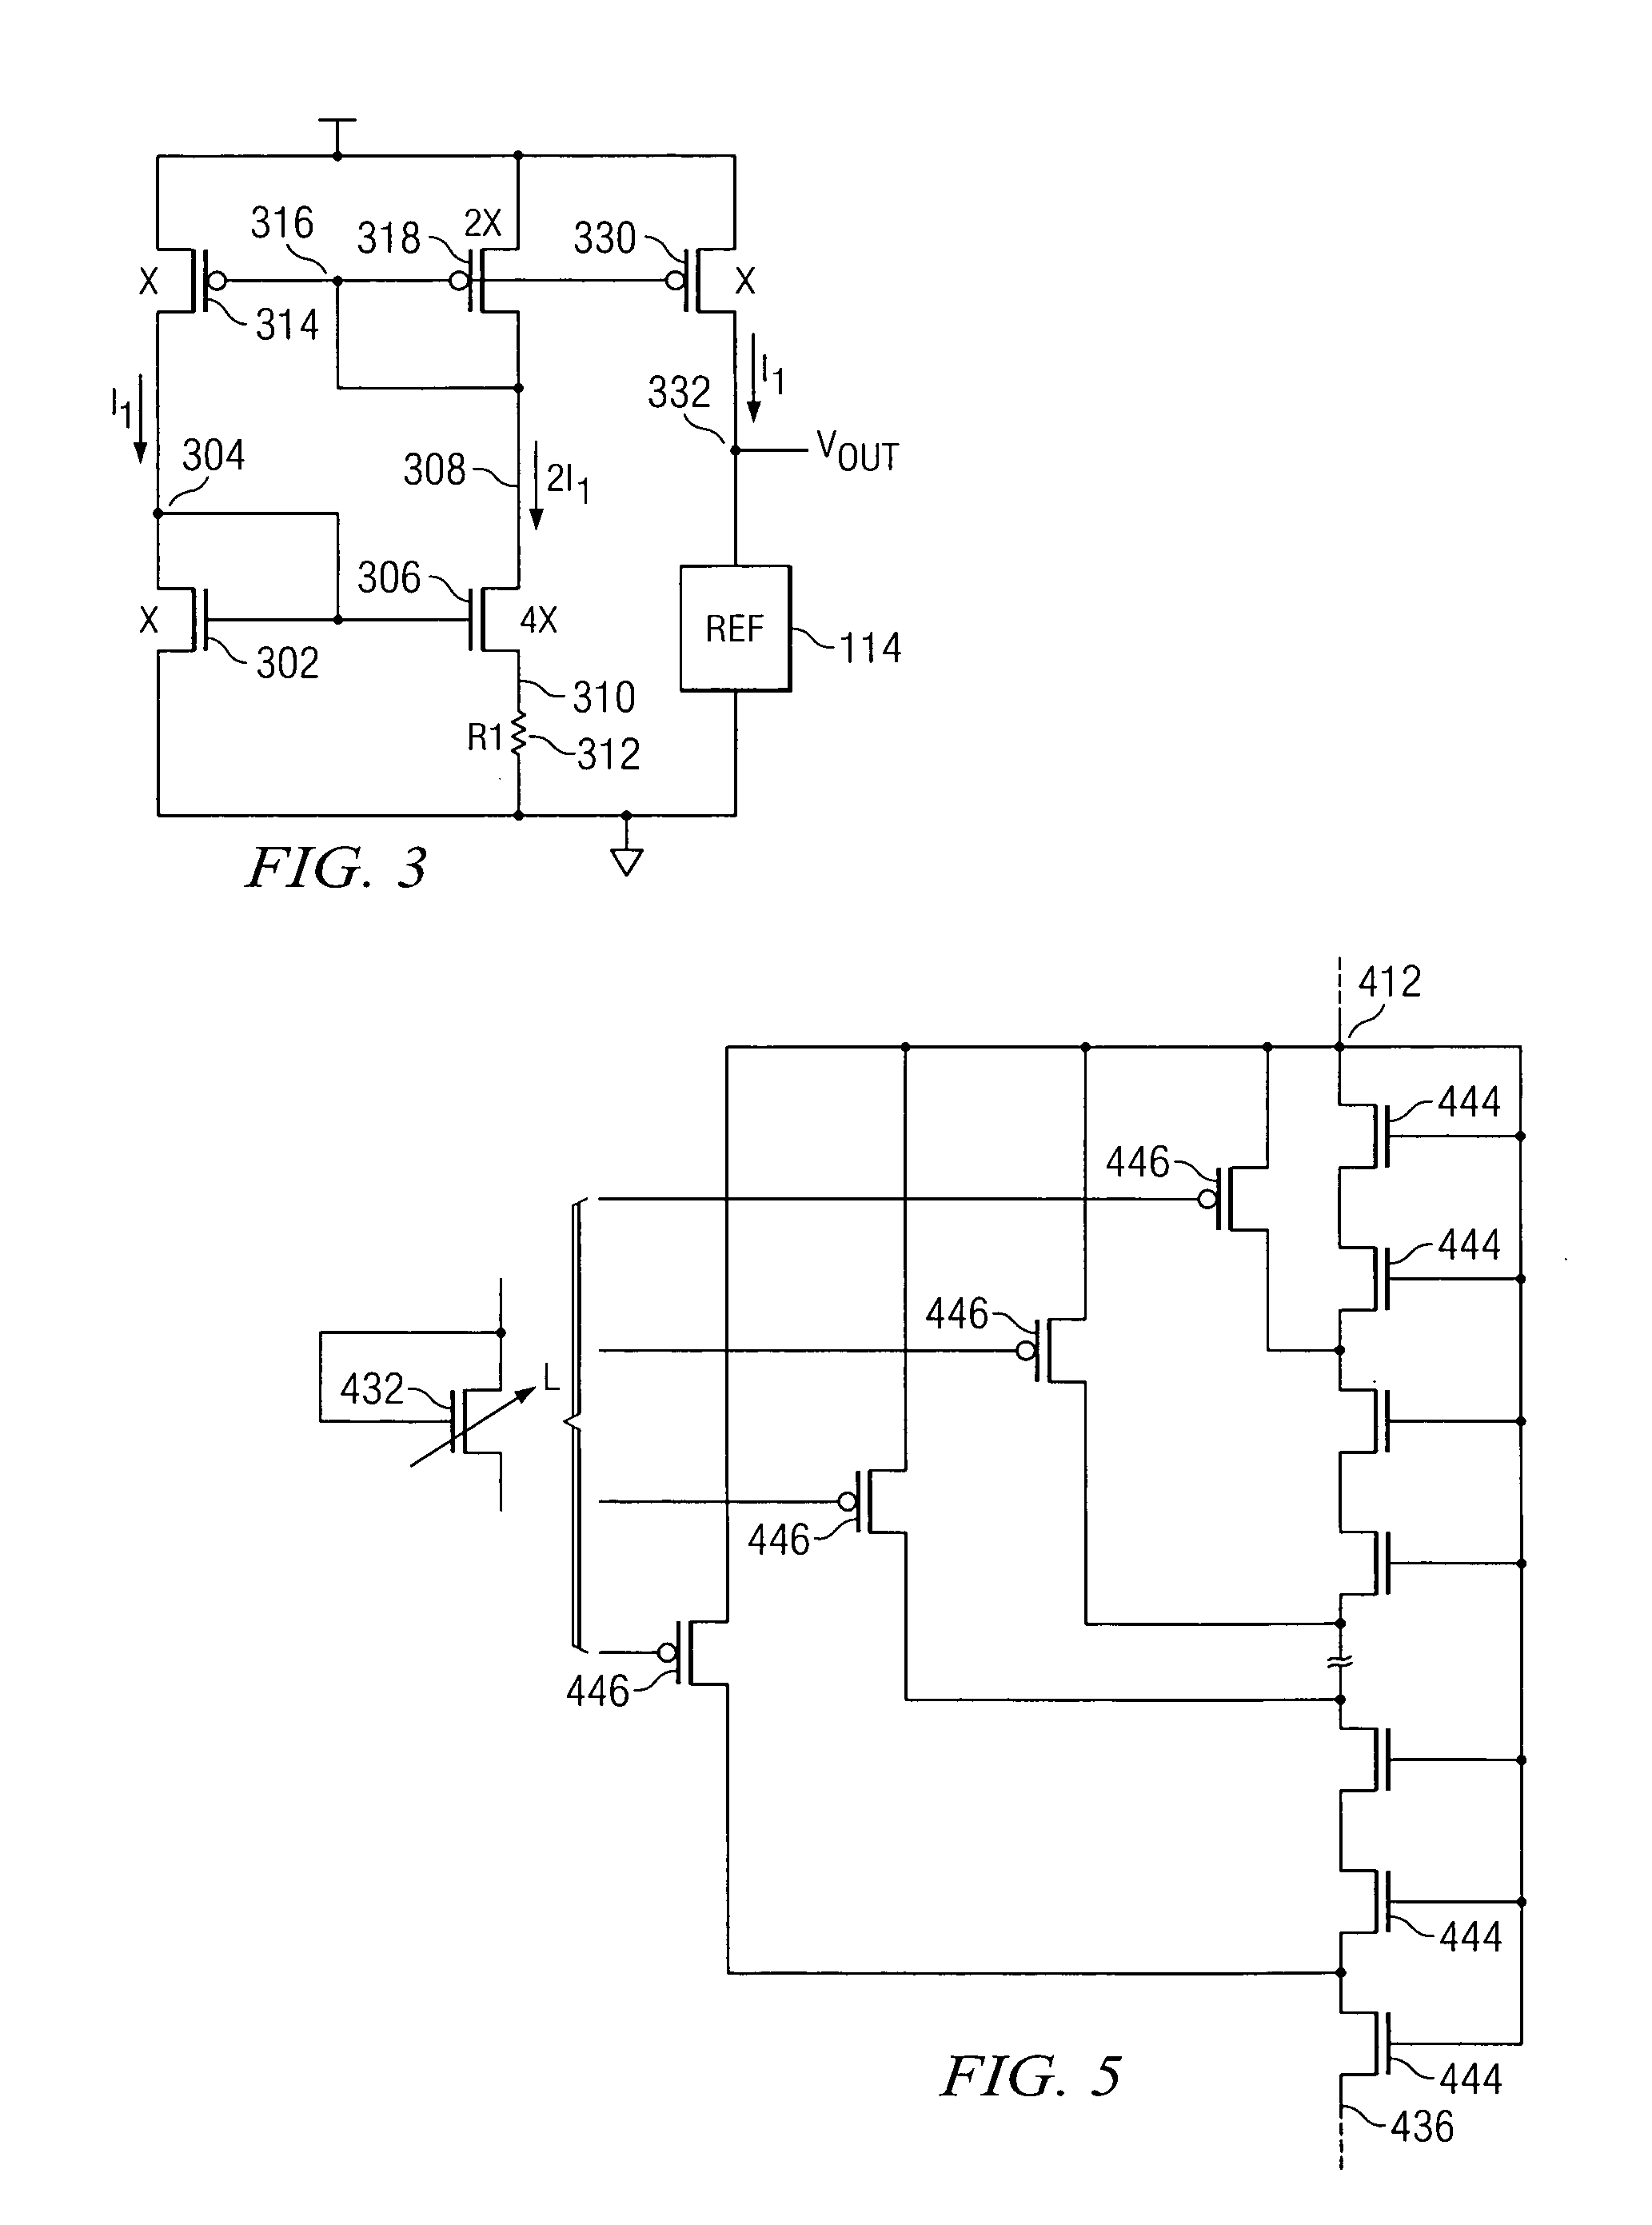 Voltage reference circuit using PTAT voltage